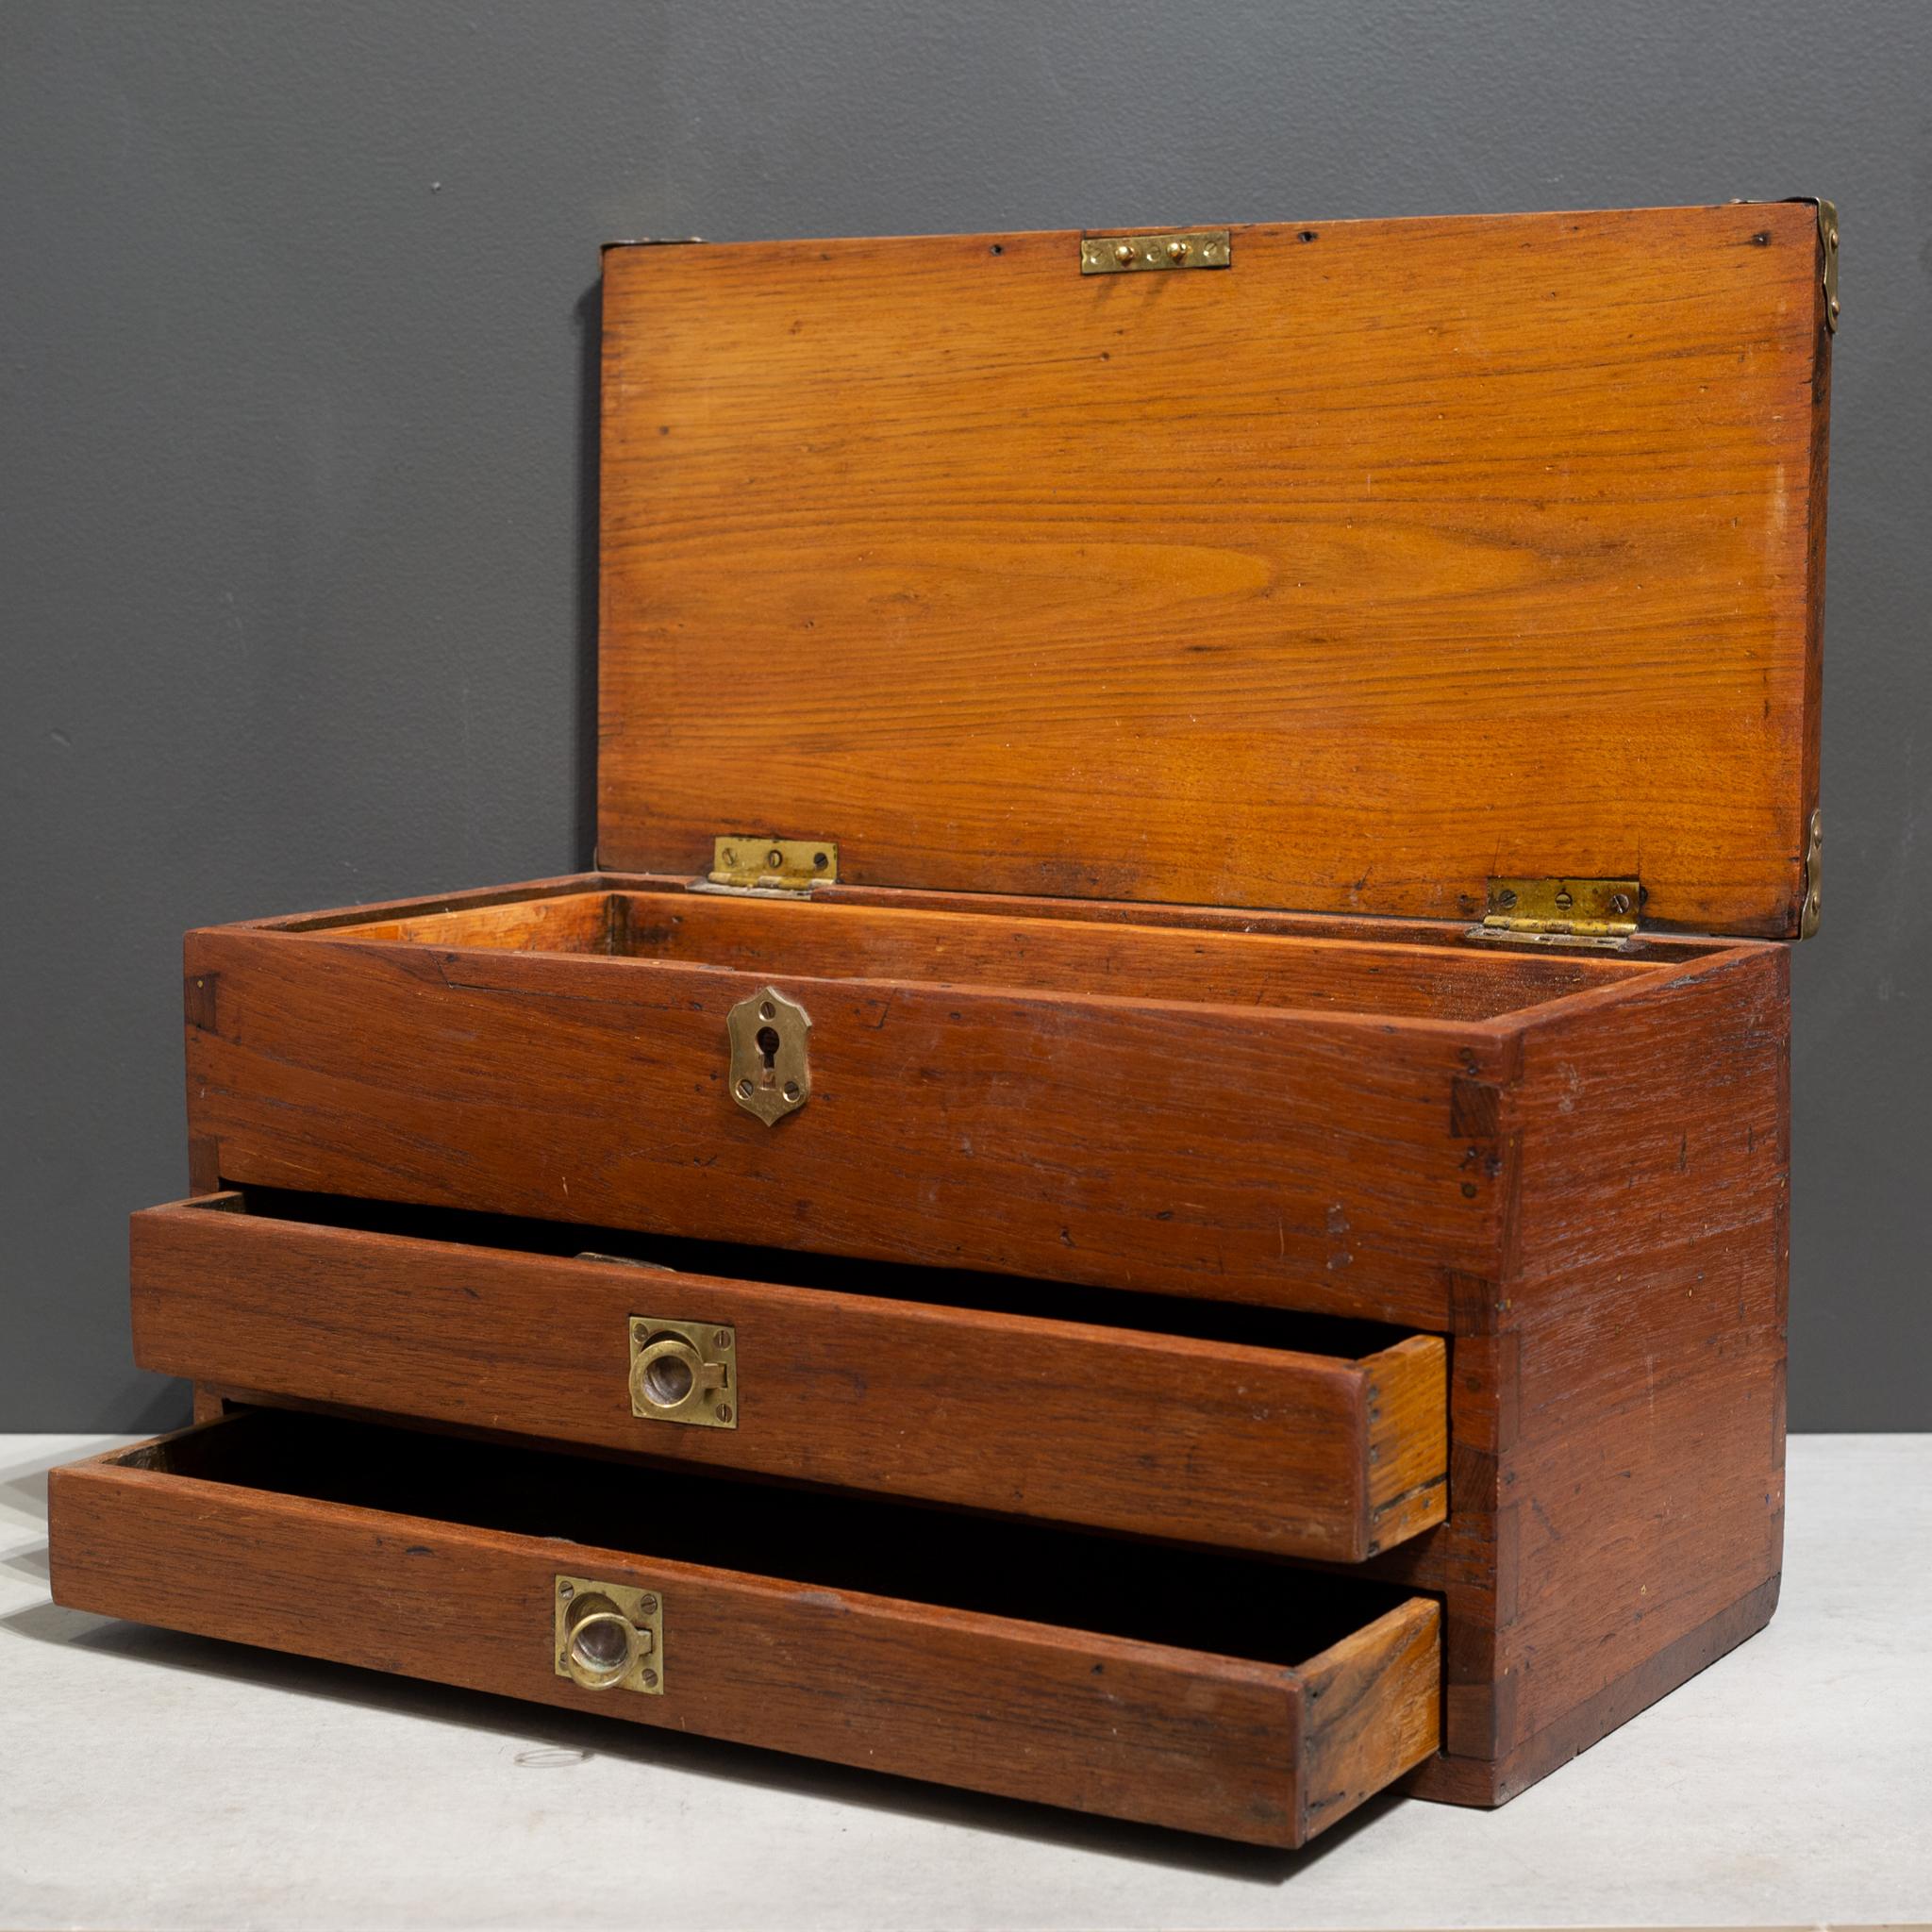 About

An antique flip top oak toolbox or machinist's chest with dovetail joints, inset pull out brass handles and brass corners, three drawers, lift top and a pull out tray. Each drawer has a primitive lock that is hidden from the inside.

